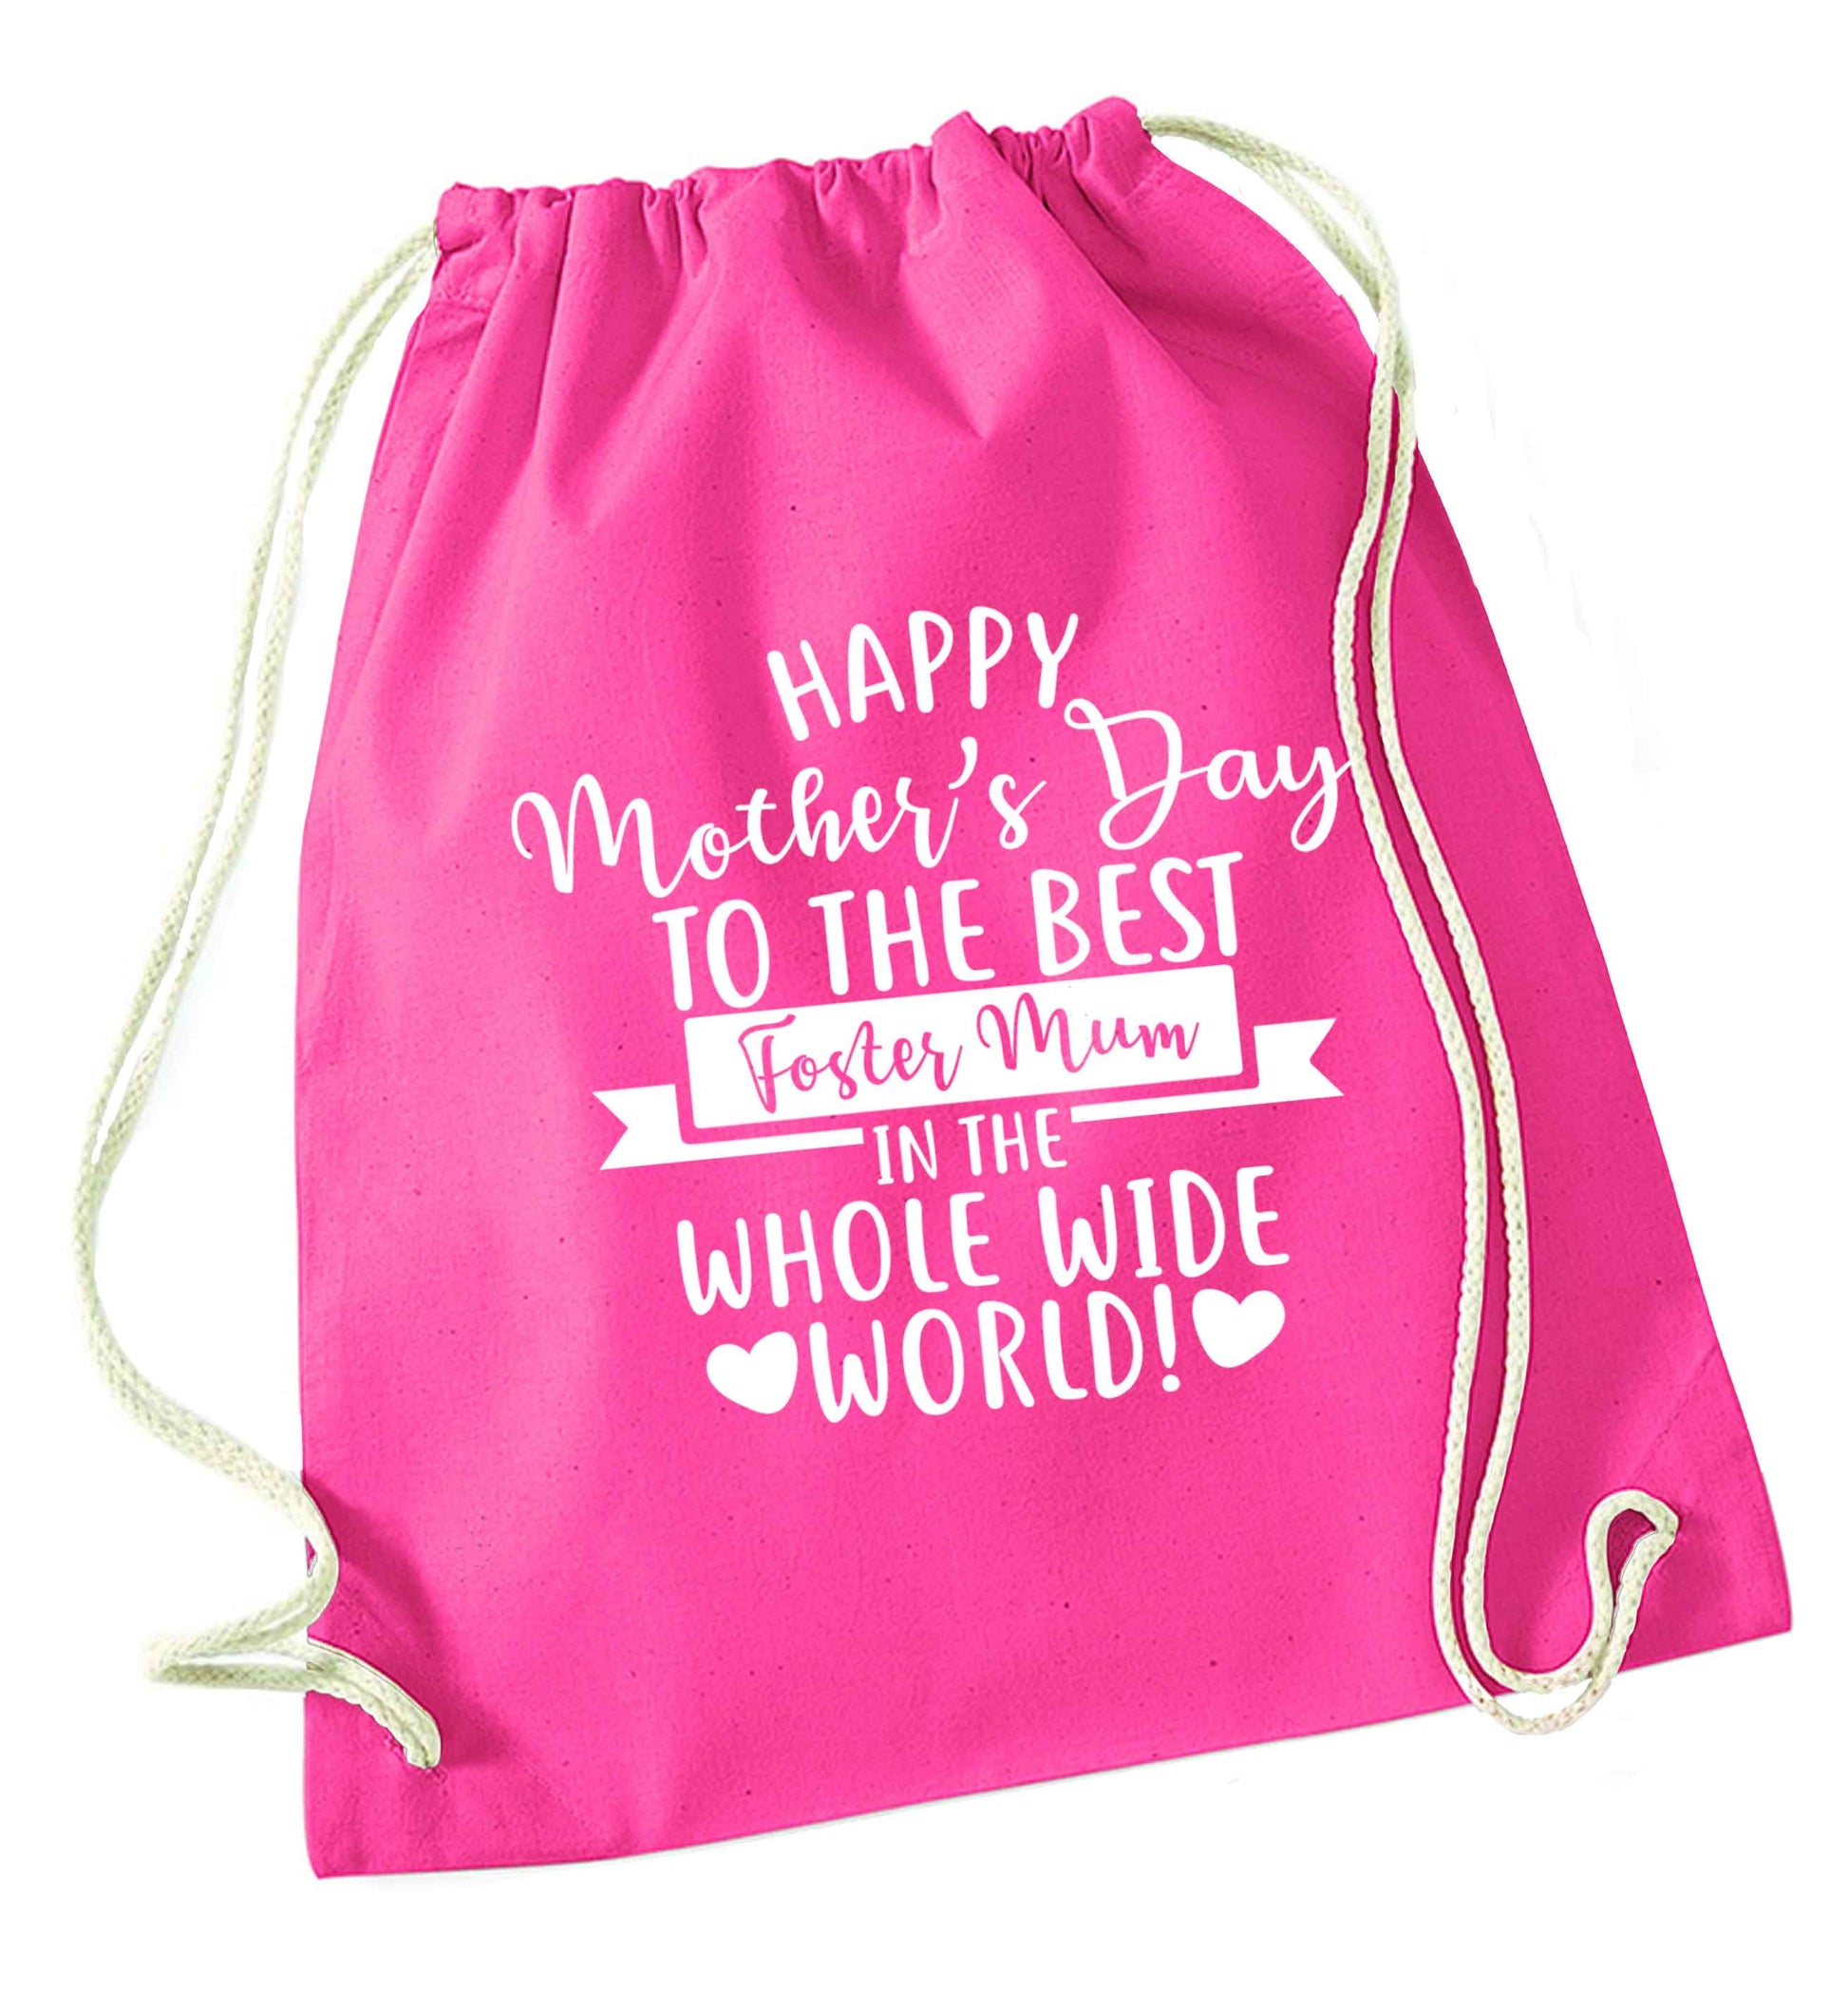 Happy mother's day to the best foster mum in the world pink drawstring bag